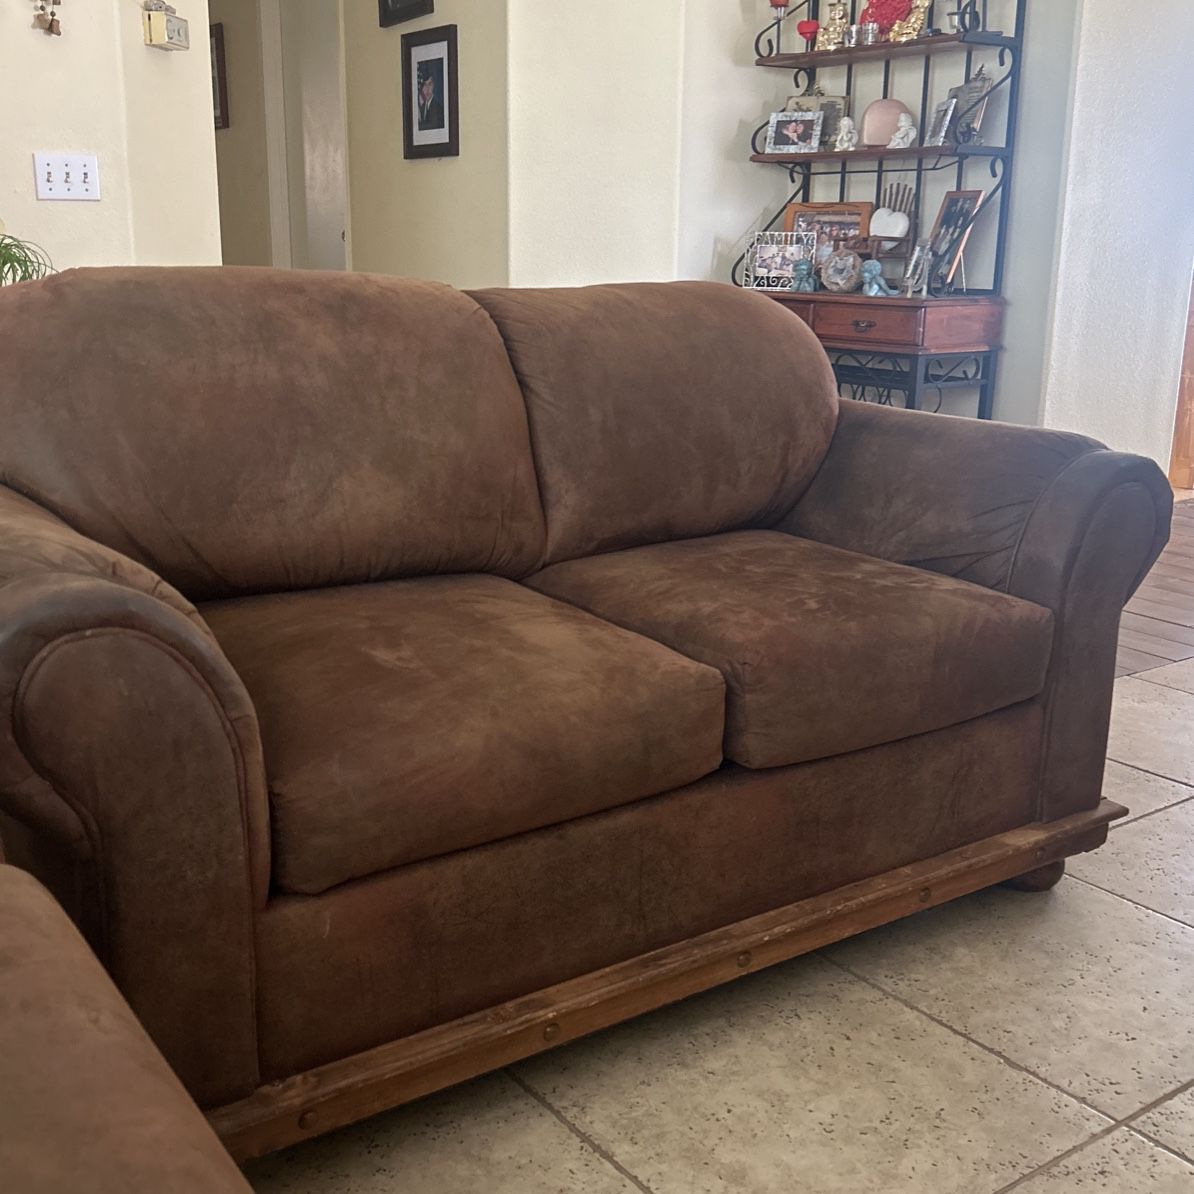 2 Couches Excellent Condition Need Gone ASAP